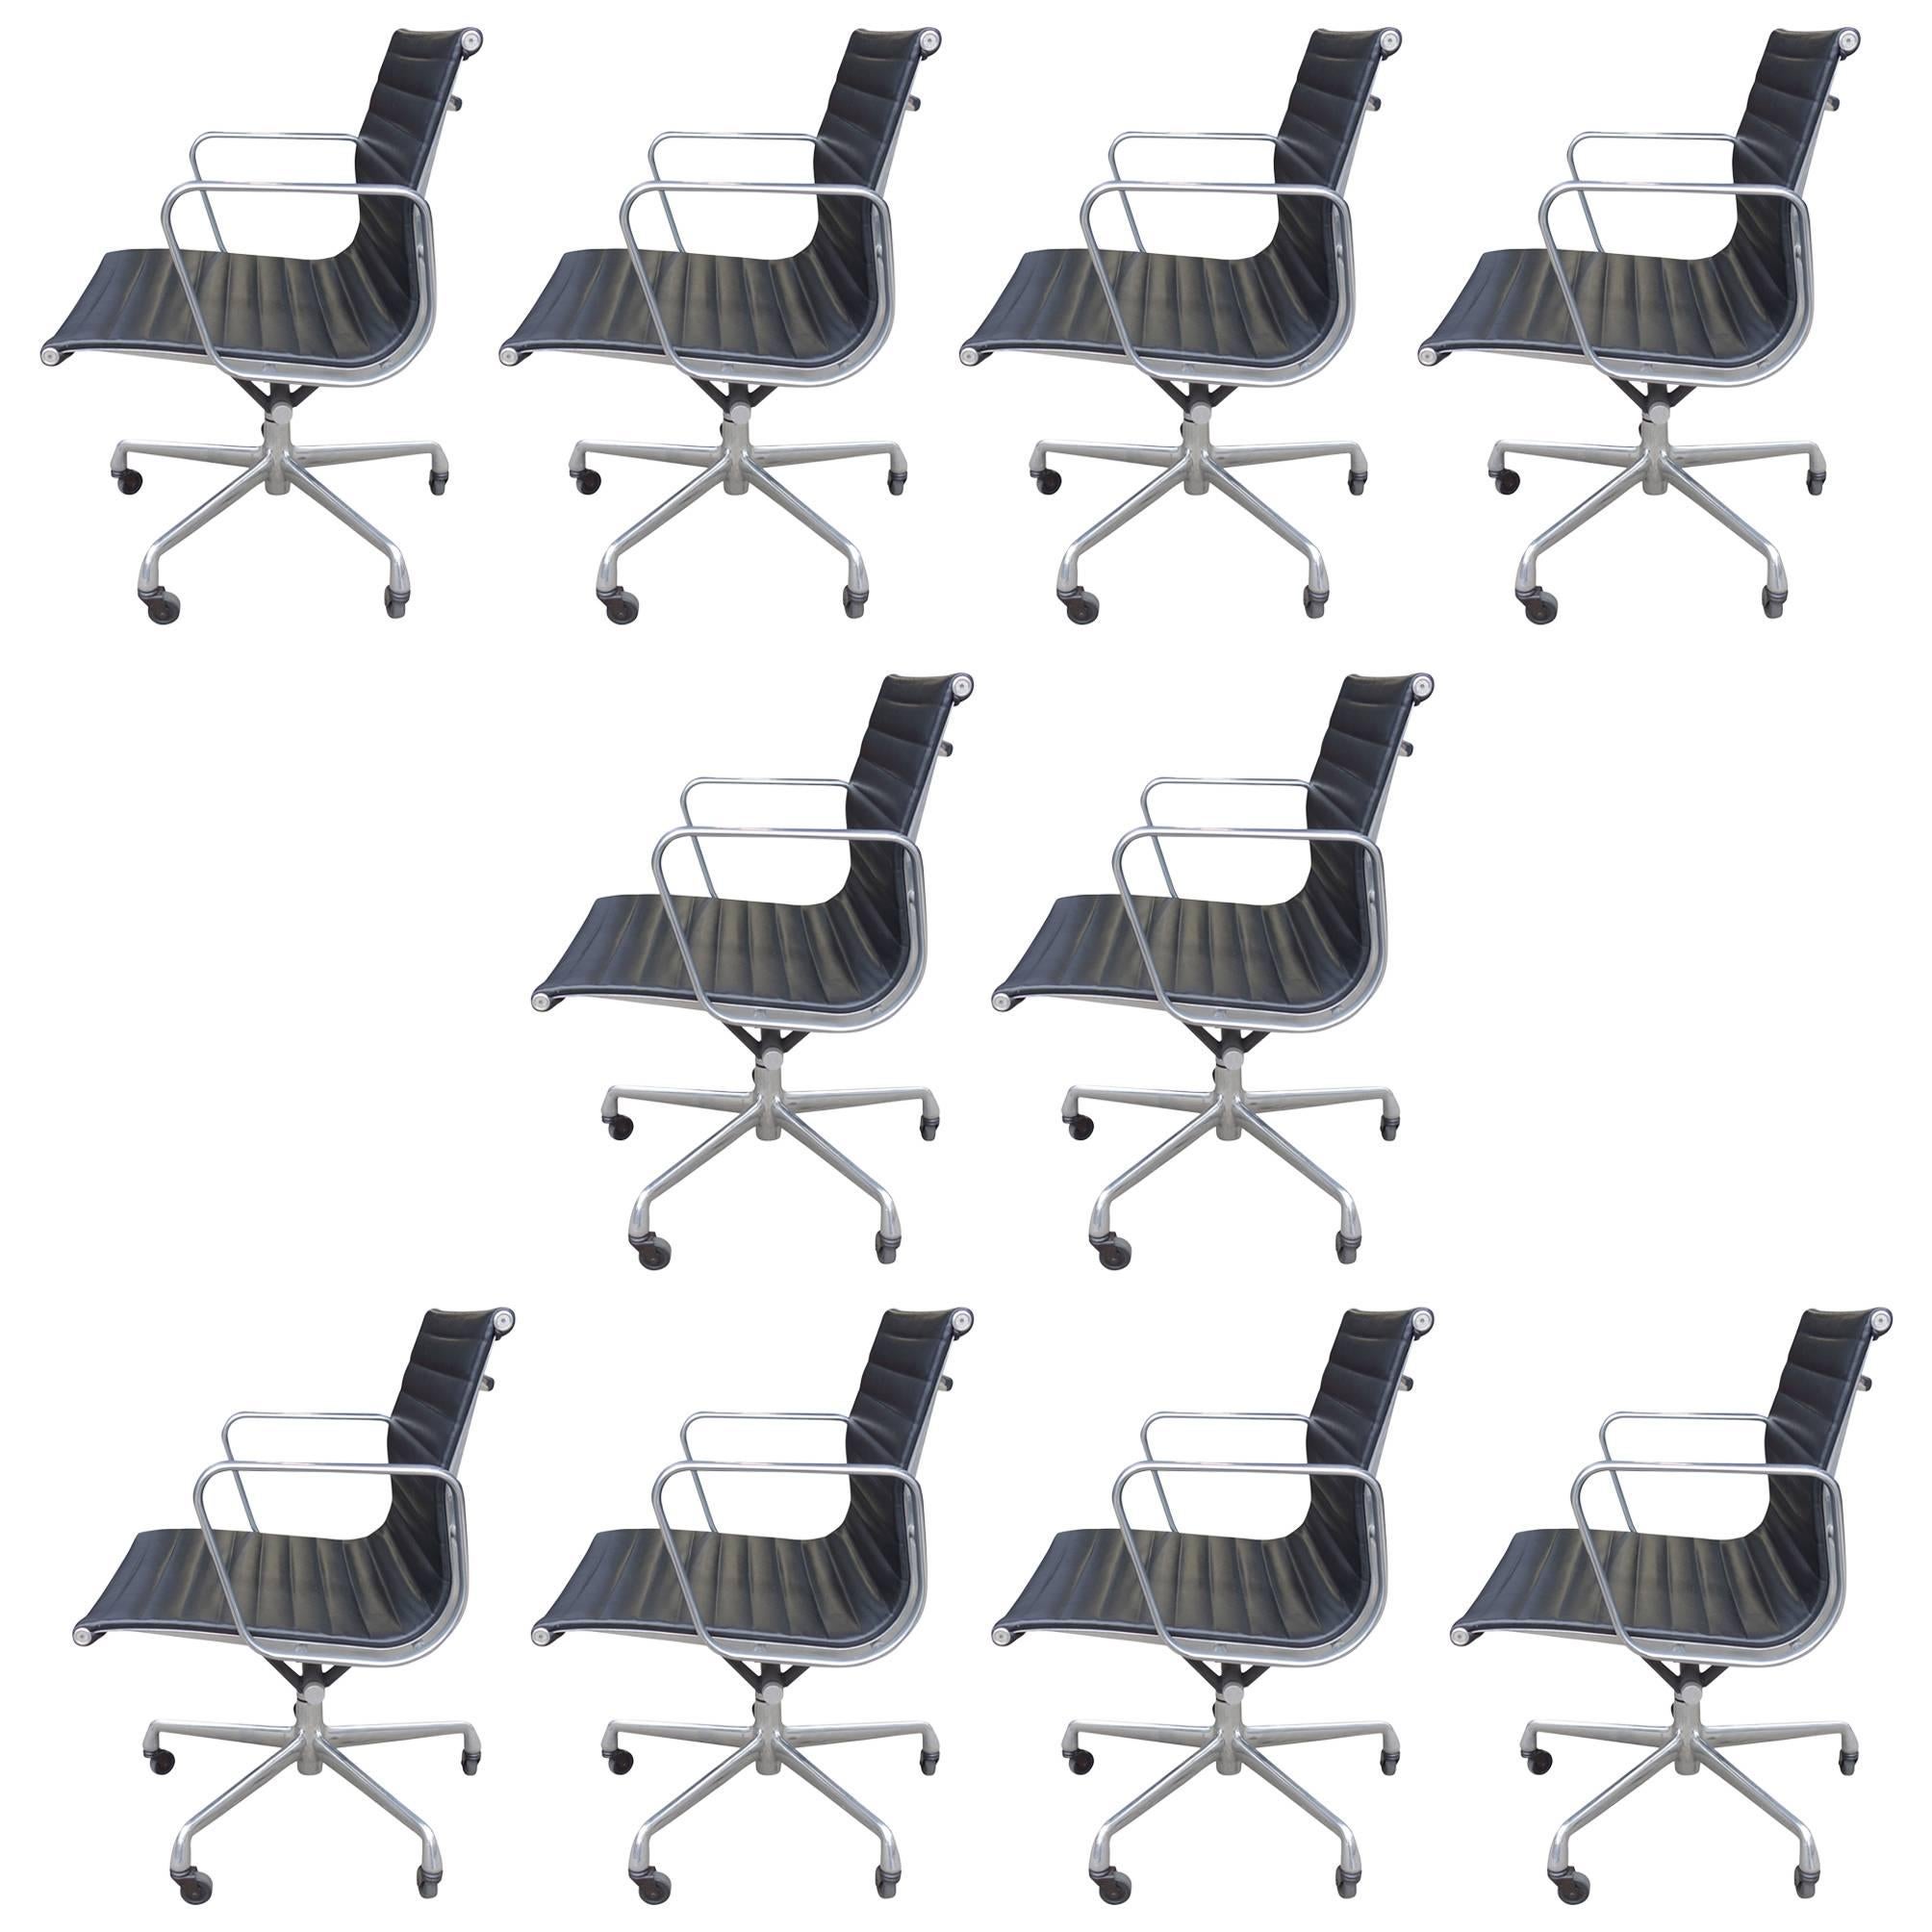 For your consideration are up to 10 aluminium group chairs in black leather designed by Eames for Herman Miller. All in very good original condition showing minimal wear. With tilt and height adjustment.